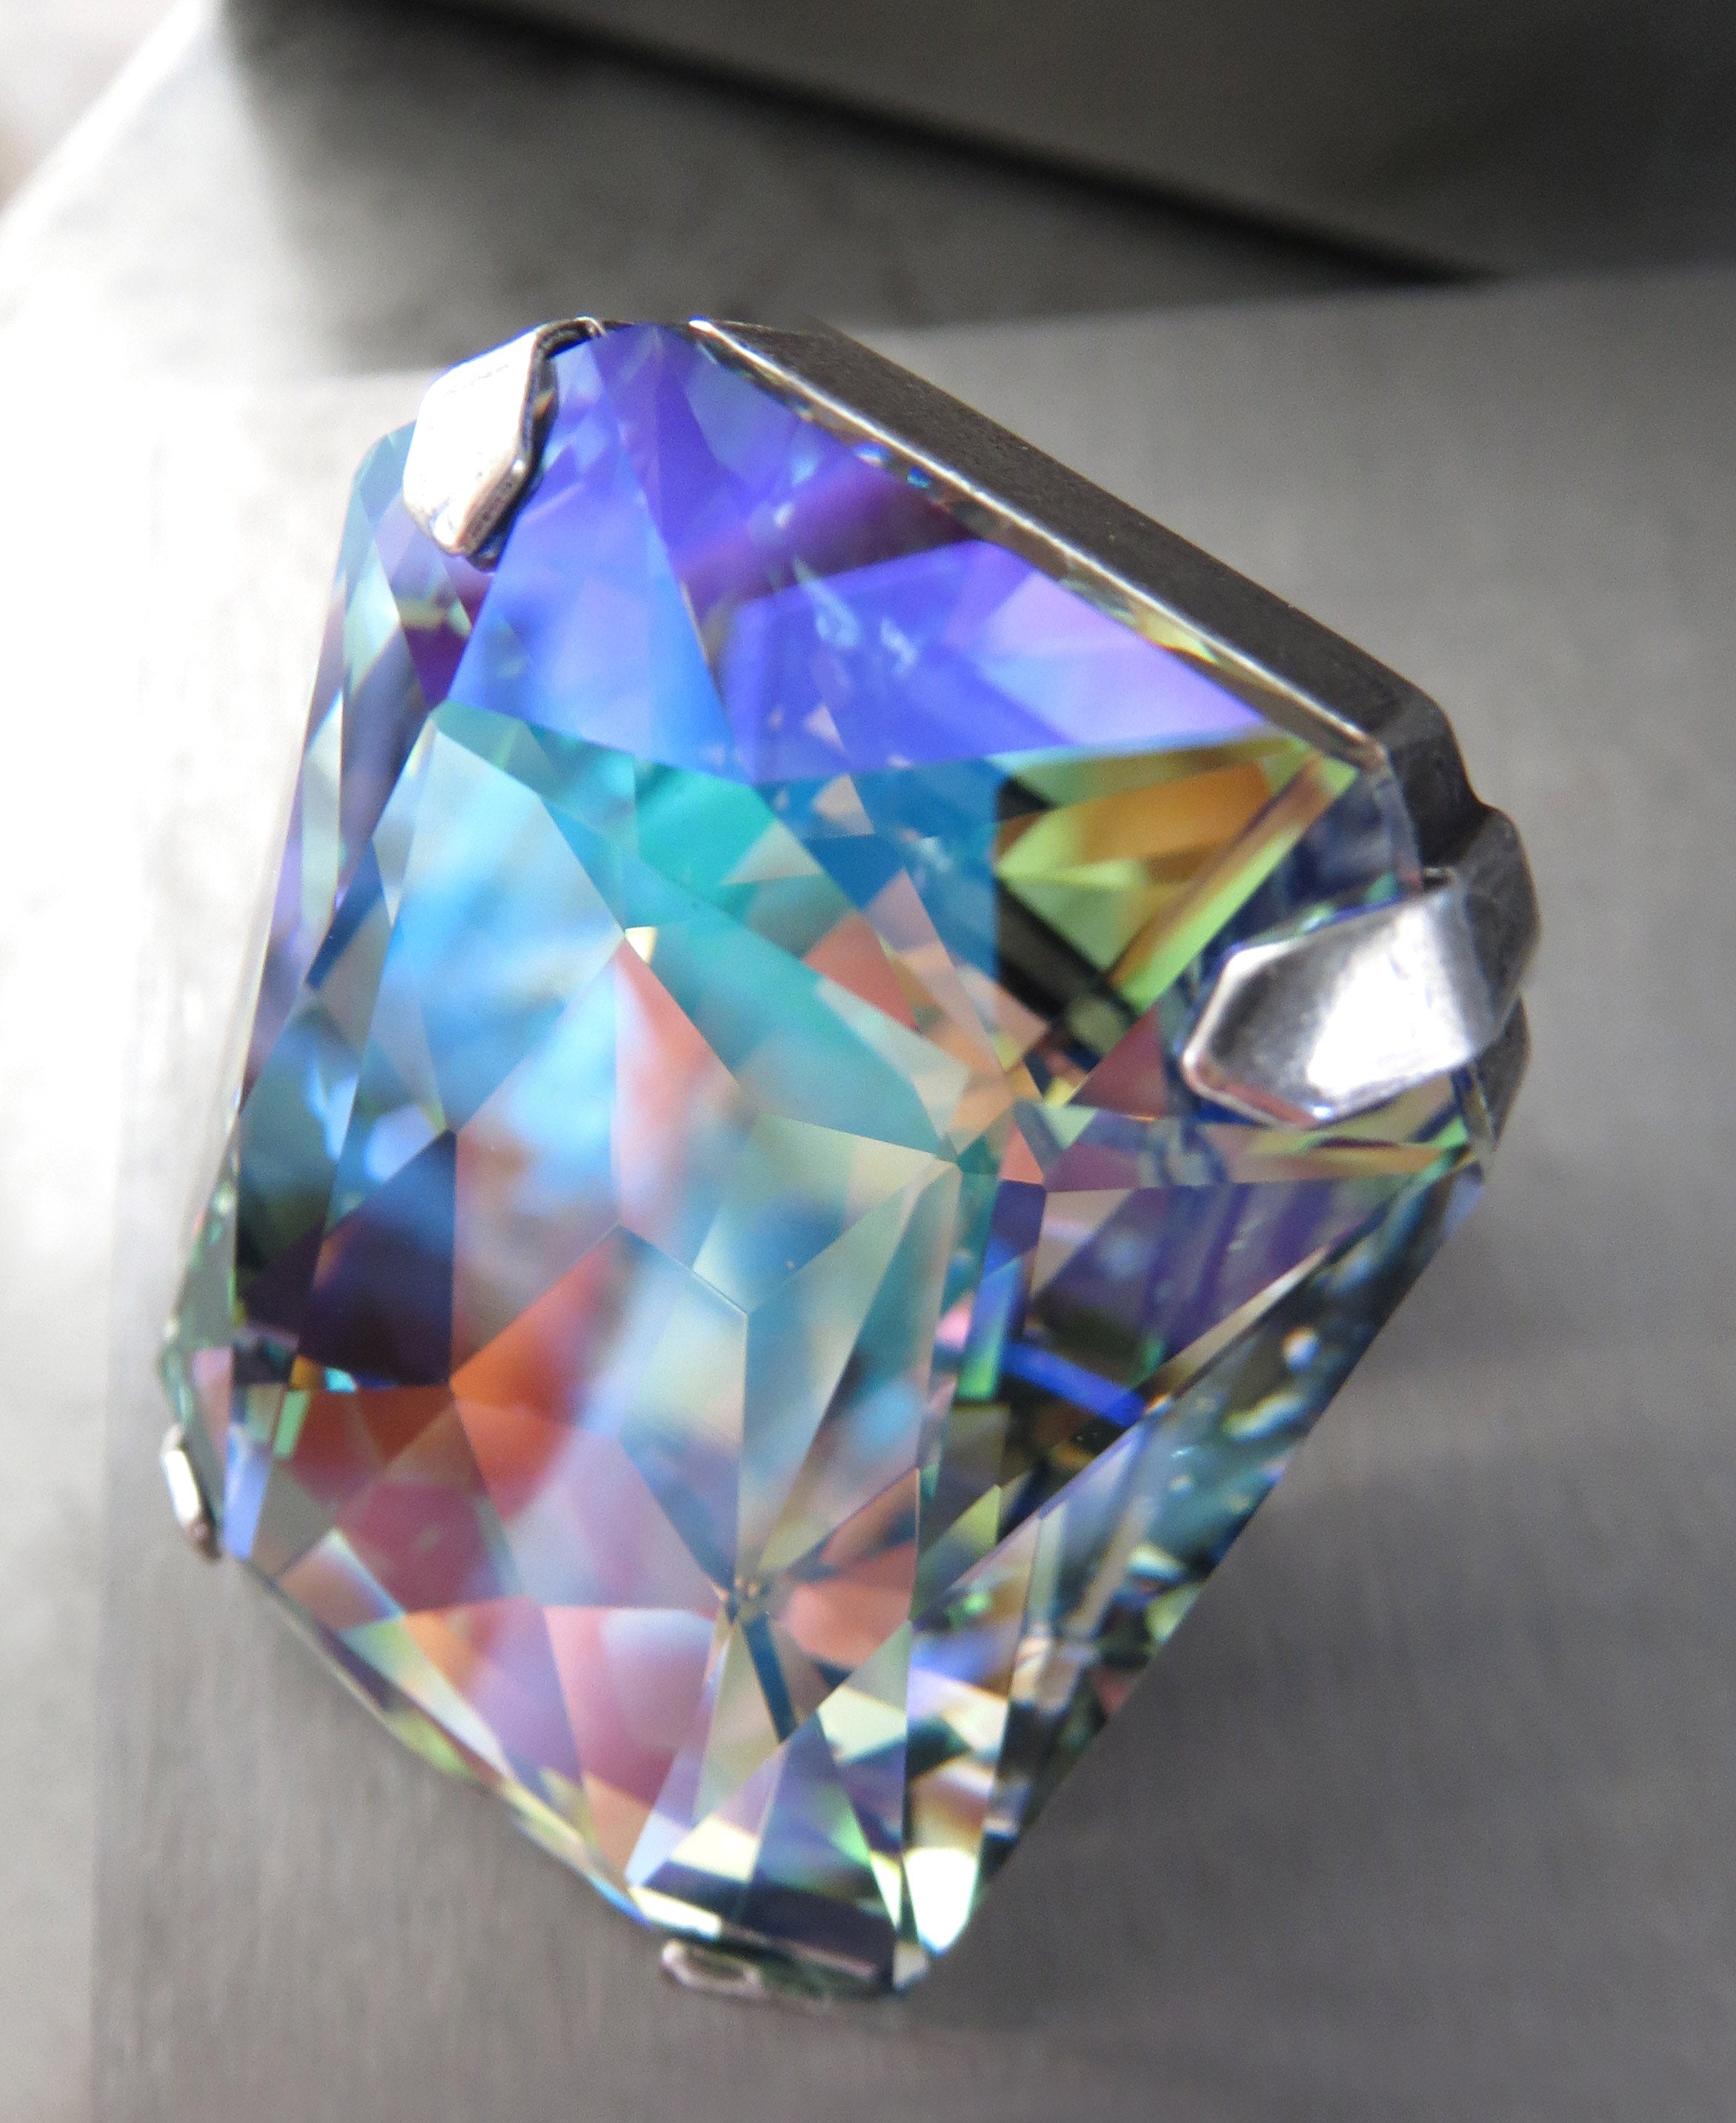 WIZARD - Iridescent Crystal Cocktail Ring with Extra Large Crystal